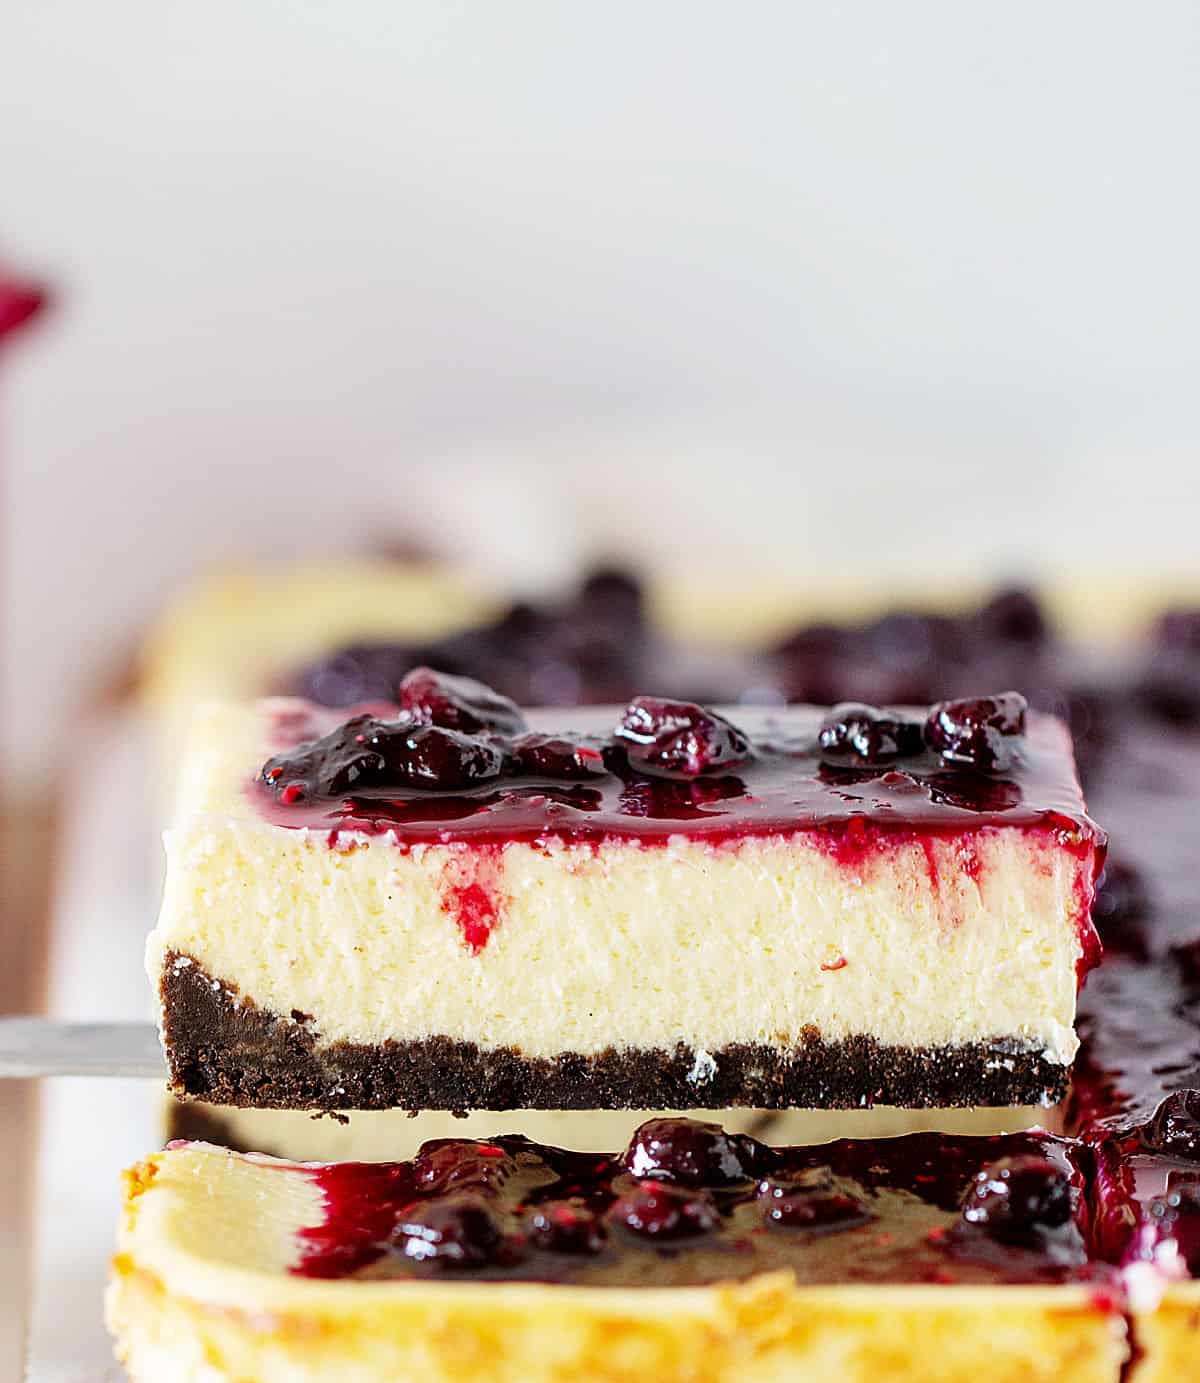 Slice of berry topped cheesecake being lifted from whole cake